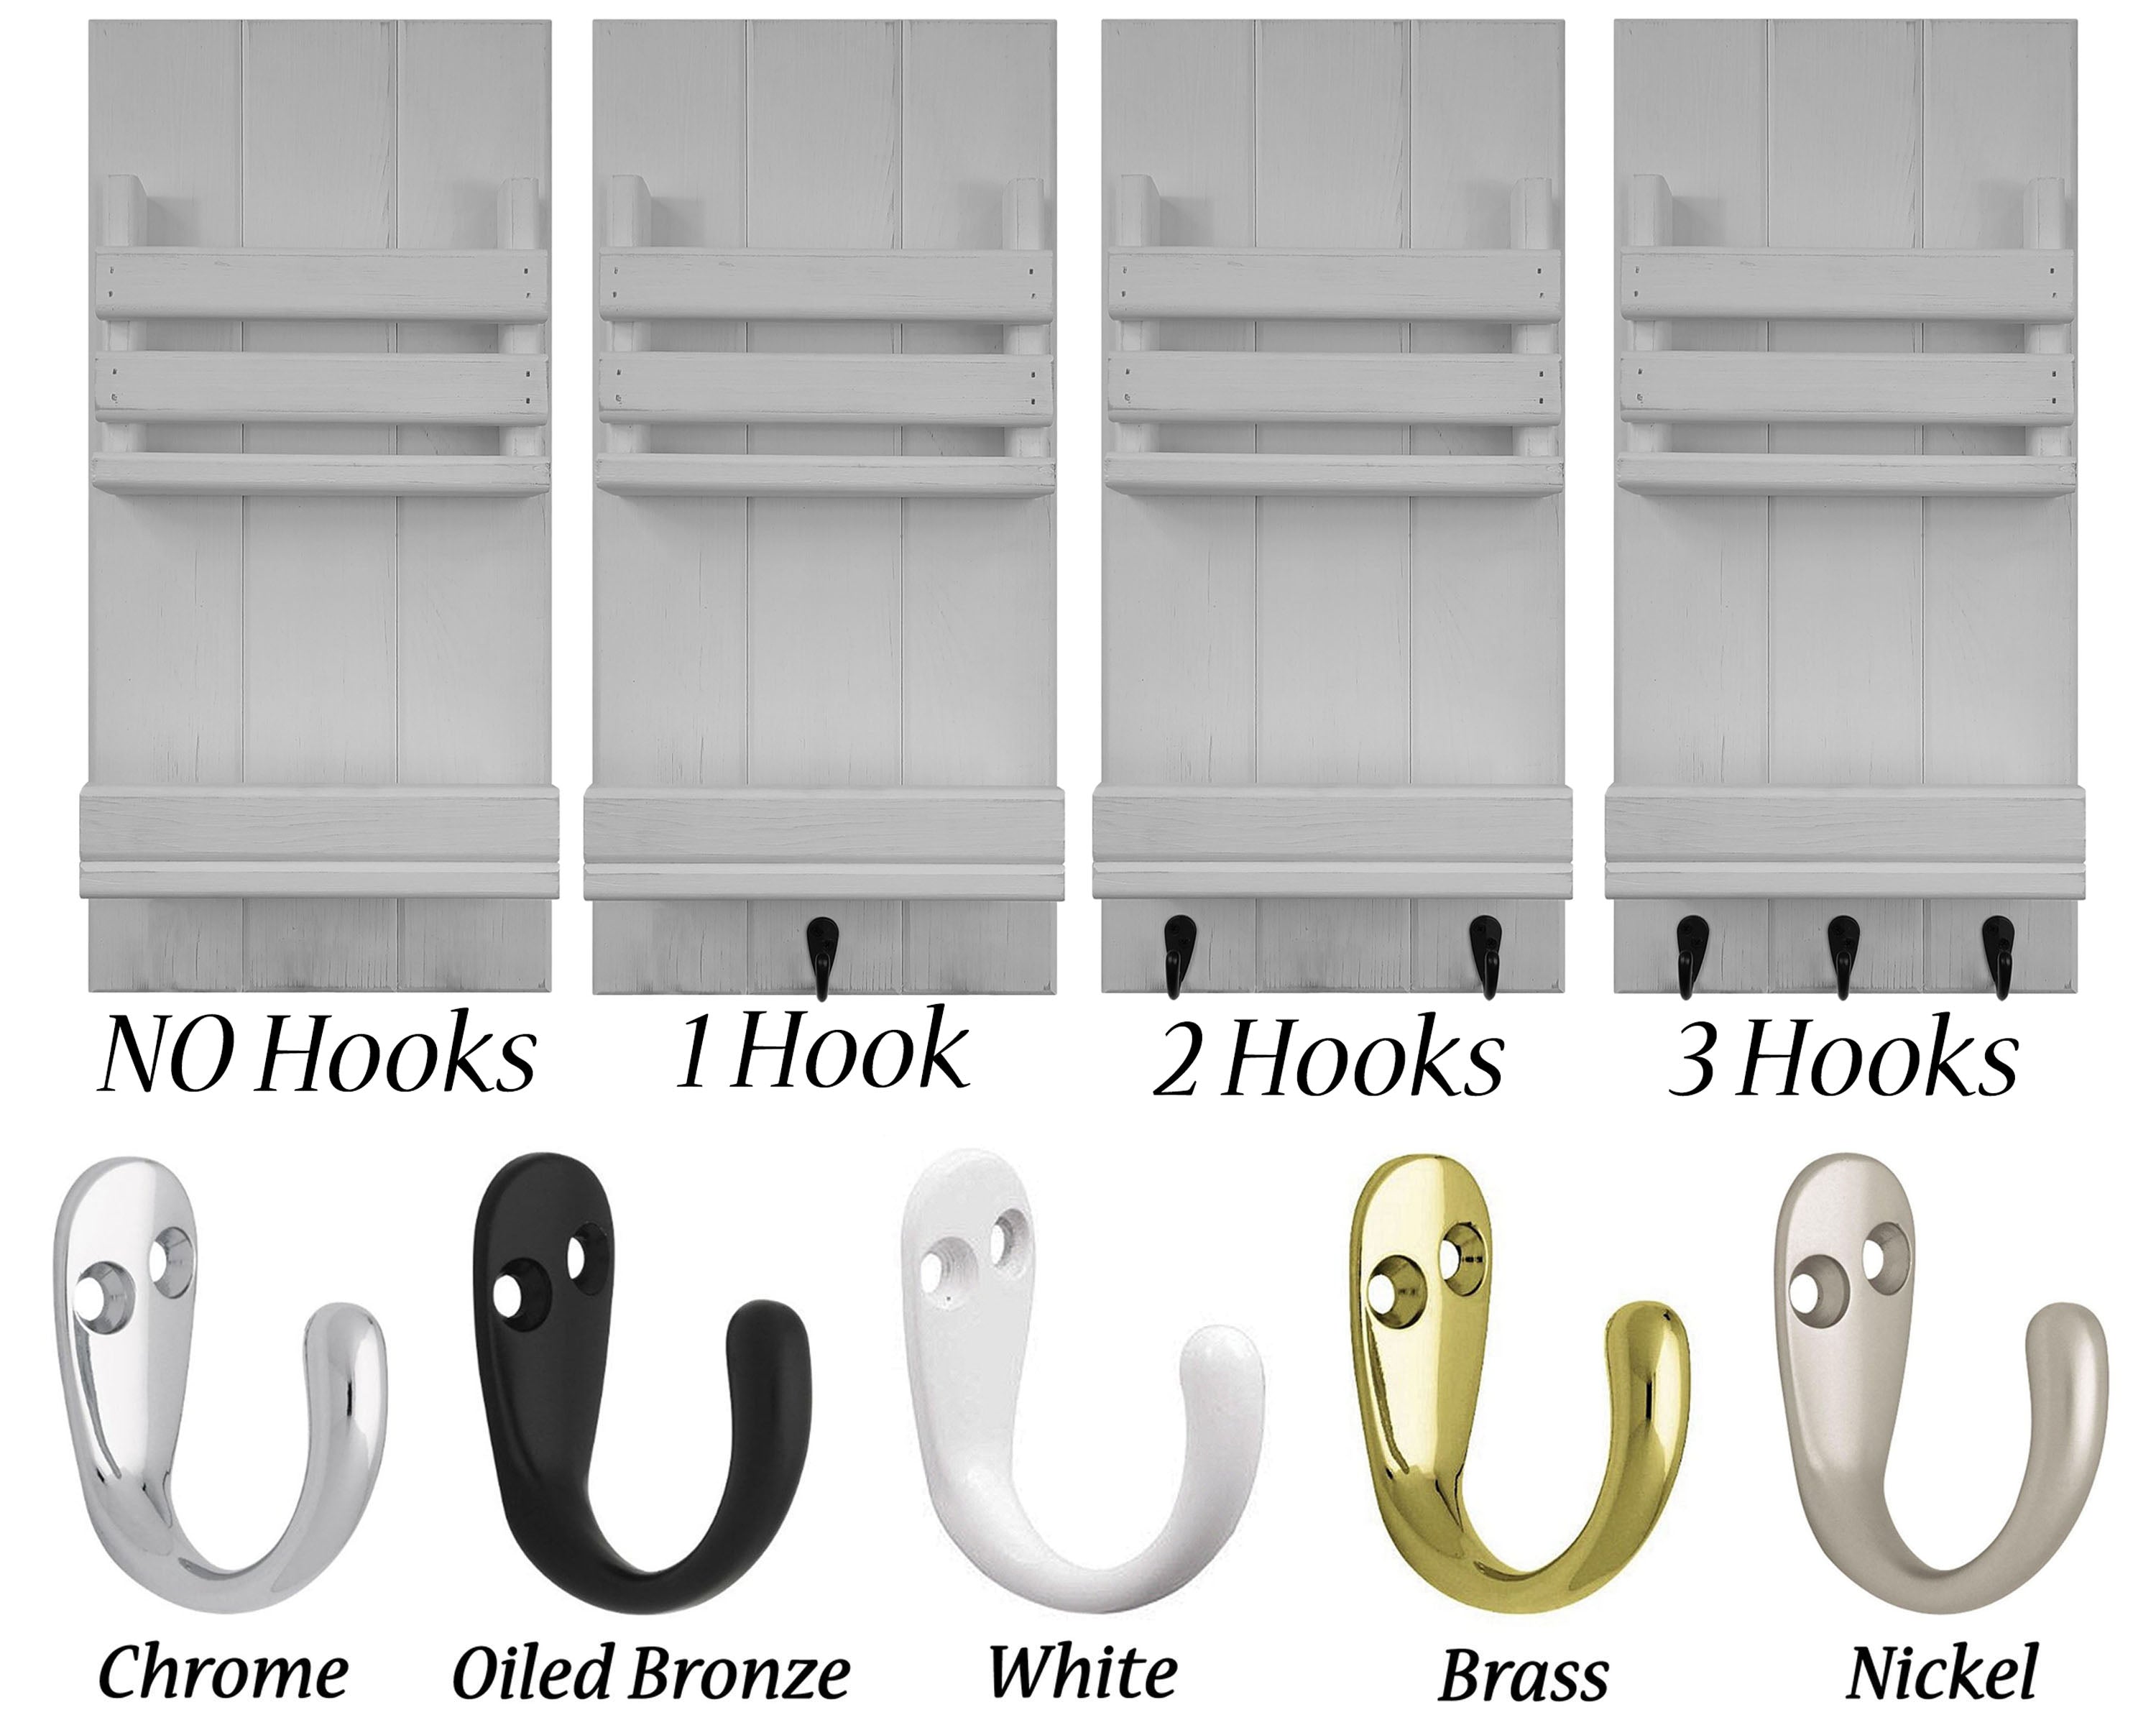 Bradford Vertical Wall Organizer, Number of Hooks and Finish